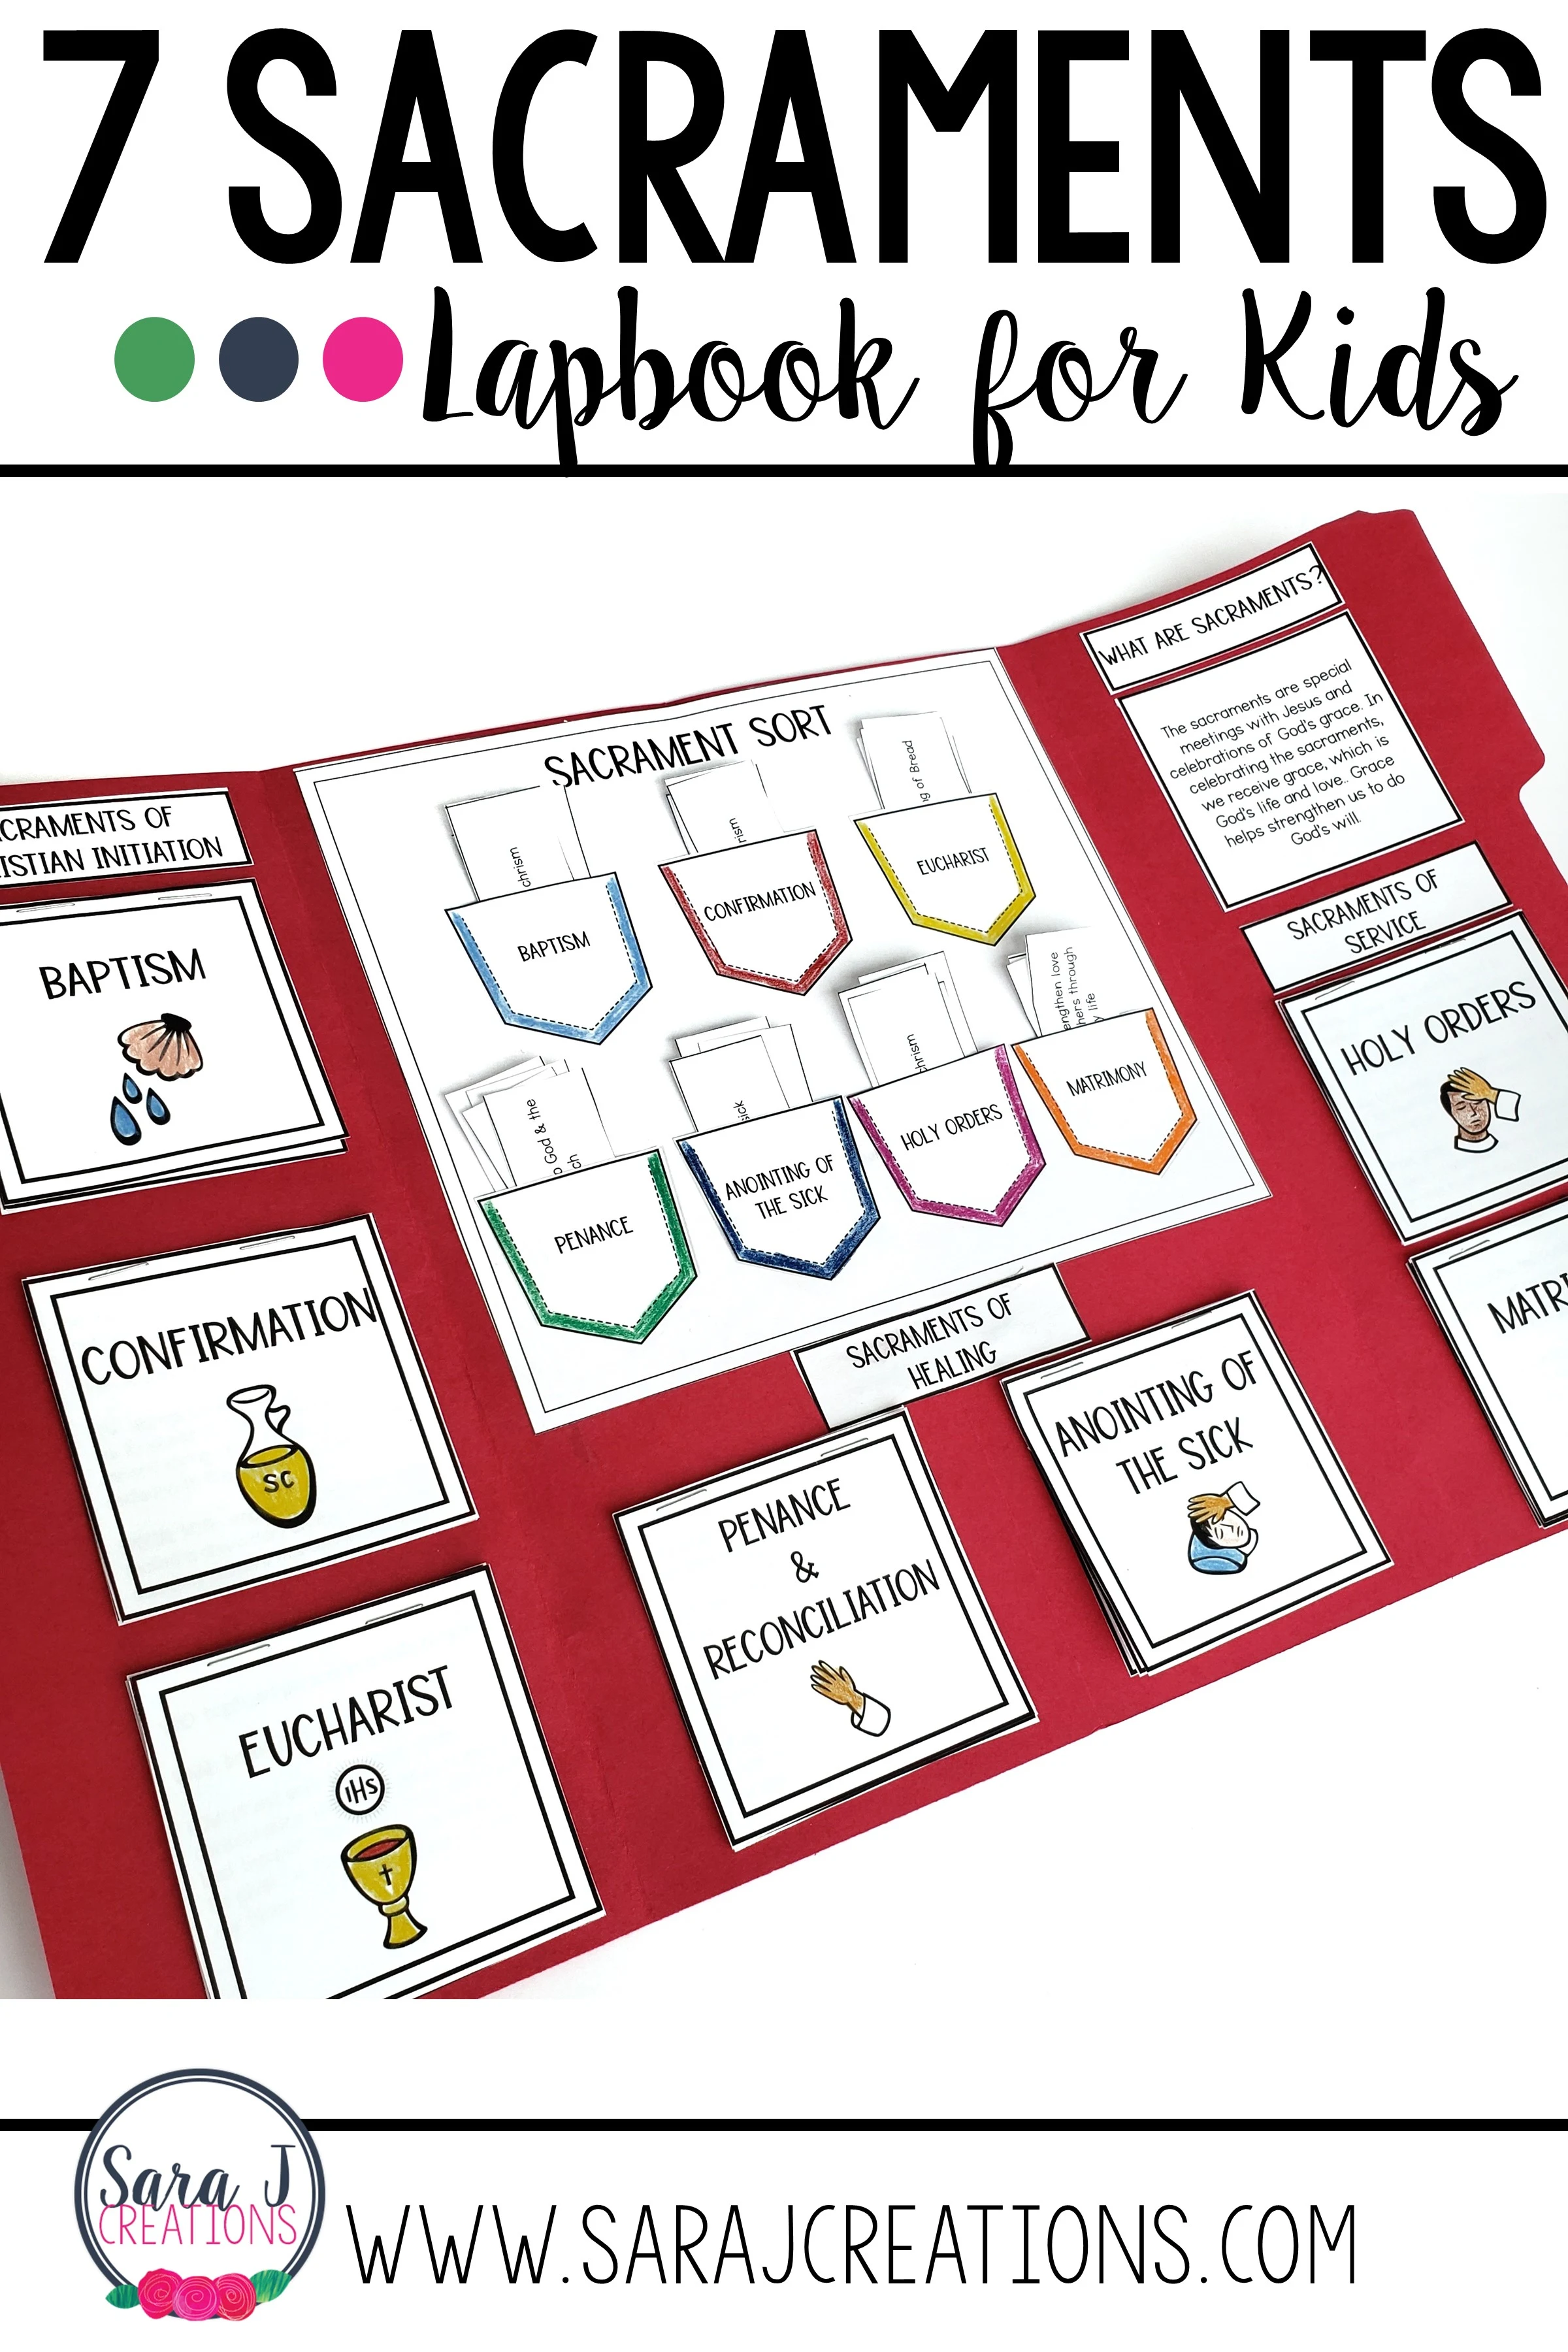 Learn about the seven sacraments of the Catholic Church with this lapbook designed for kids